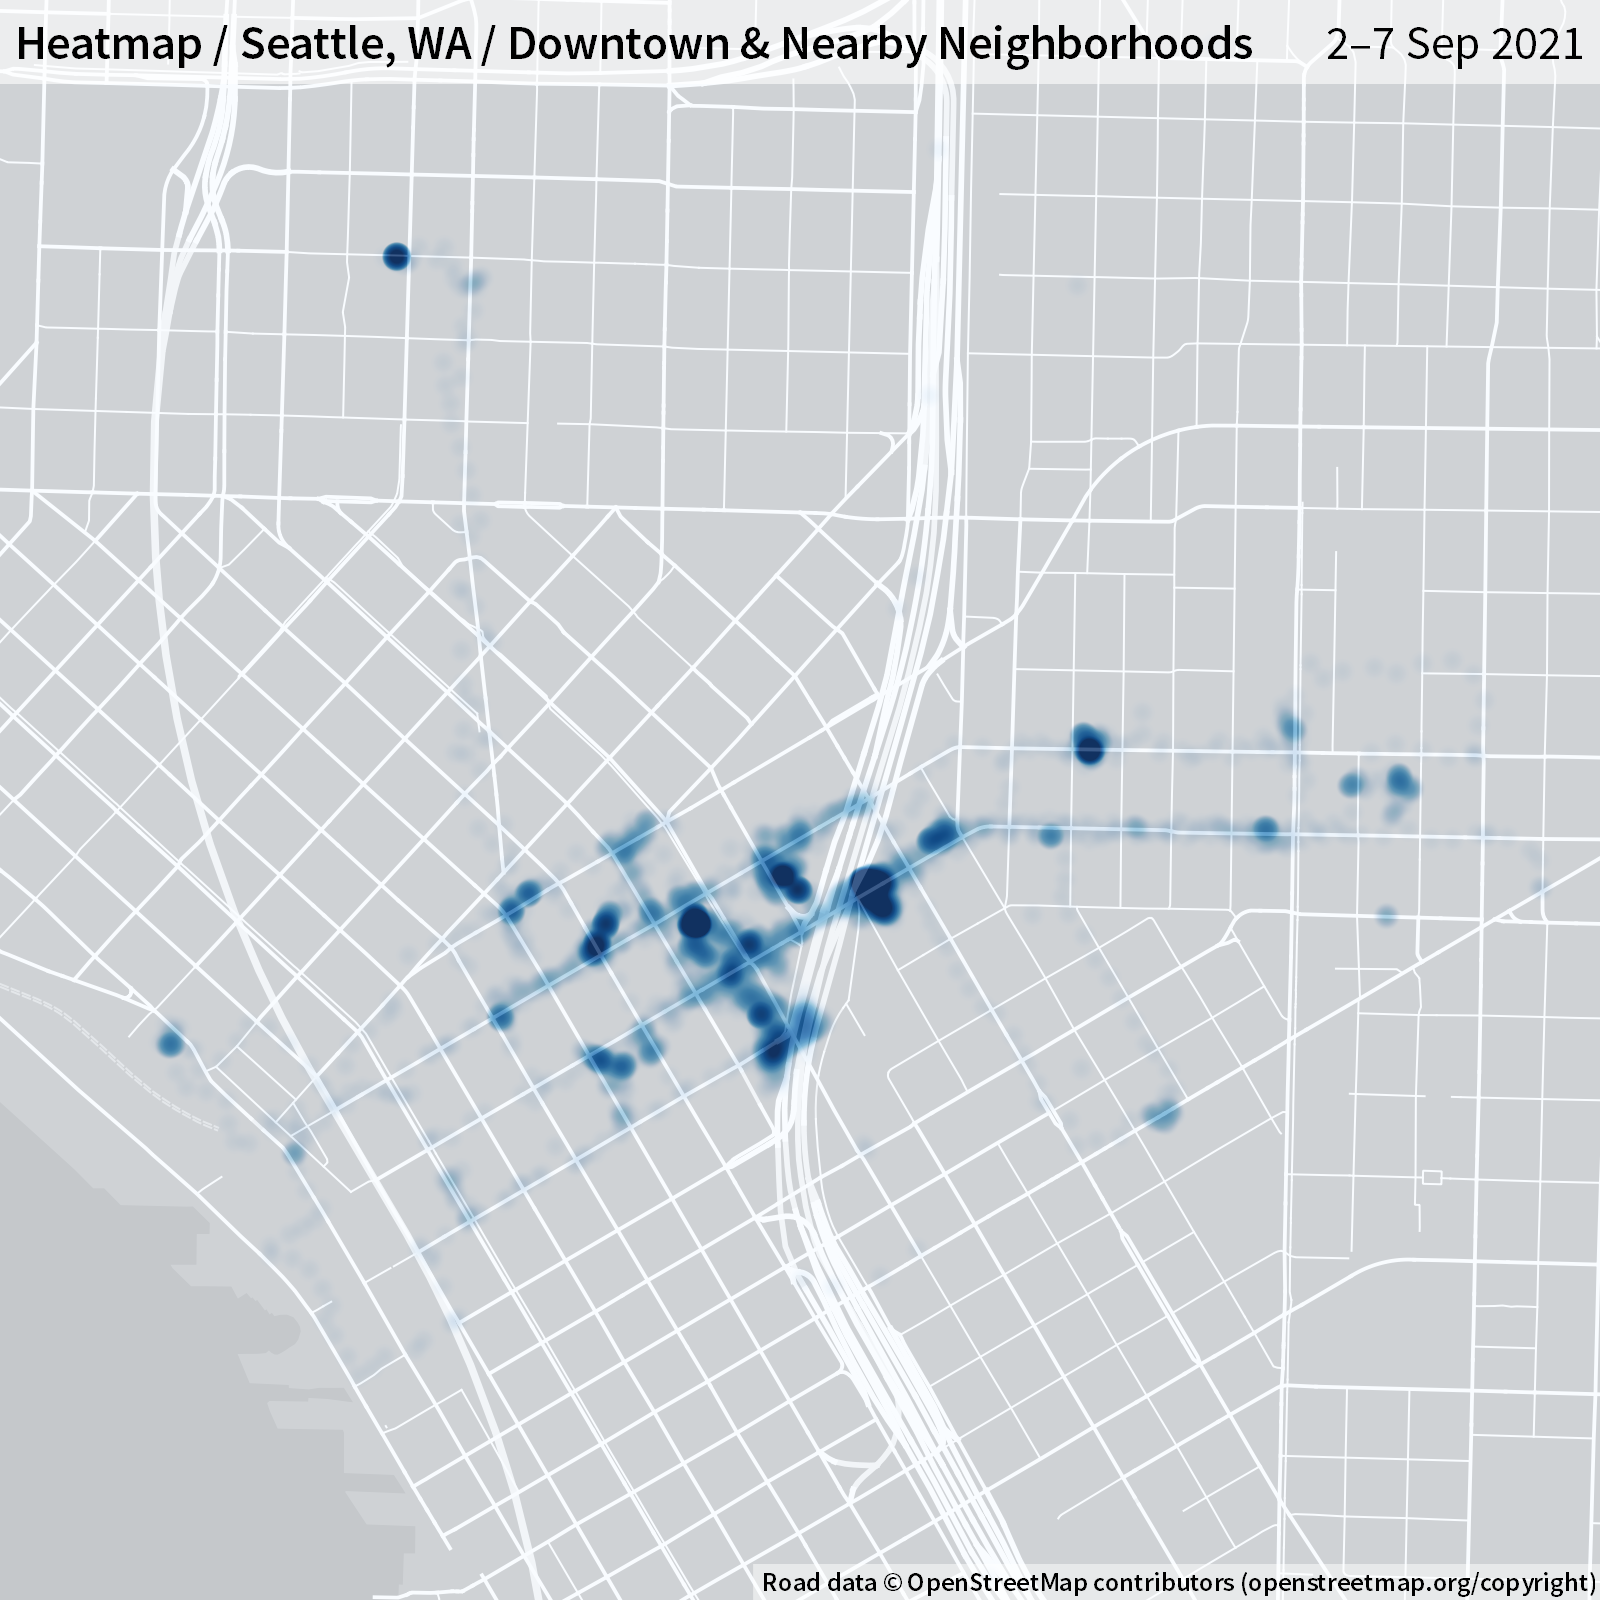 Heatmap of Seattle, Washington's downtown and nearby neighborhoods from 2-7 September 2021.